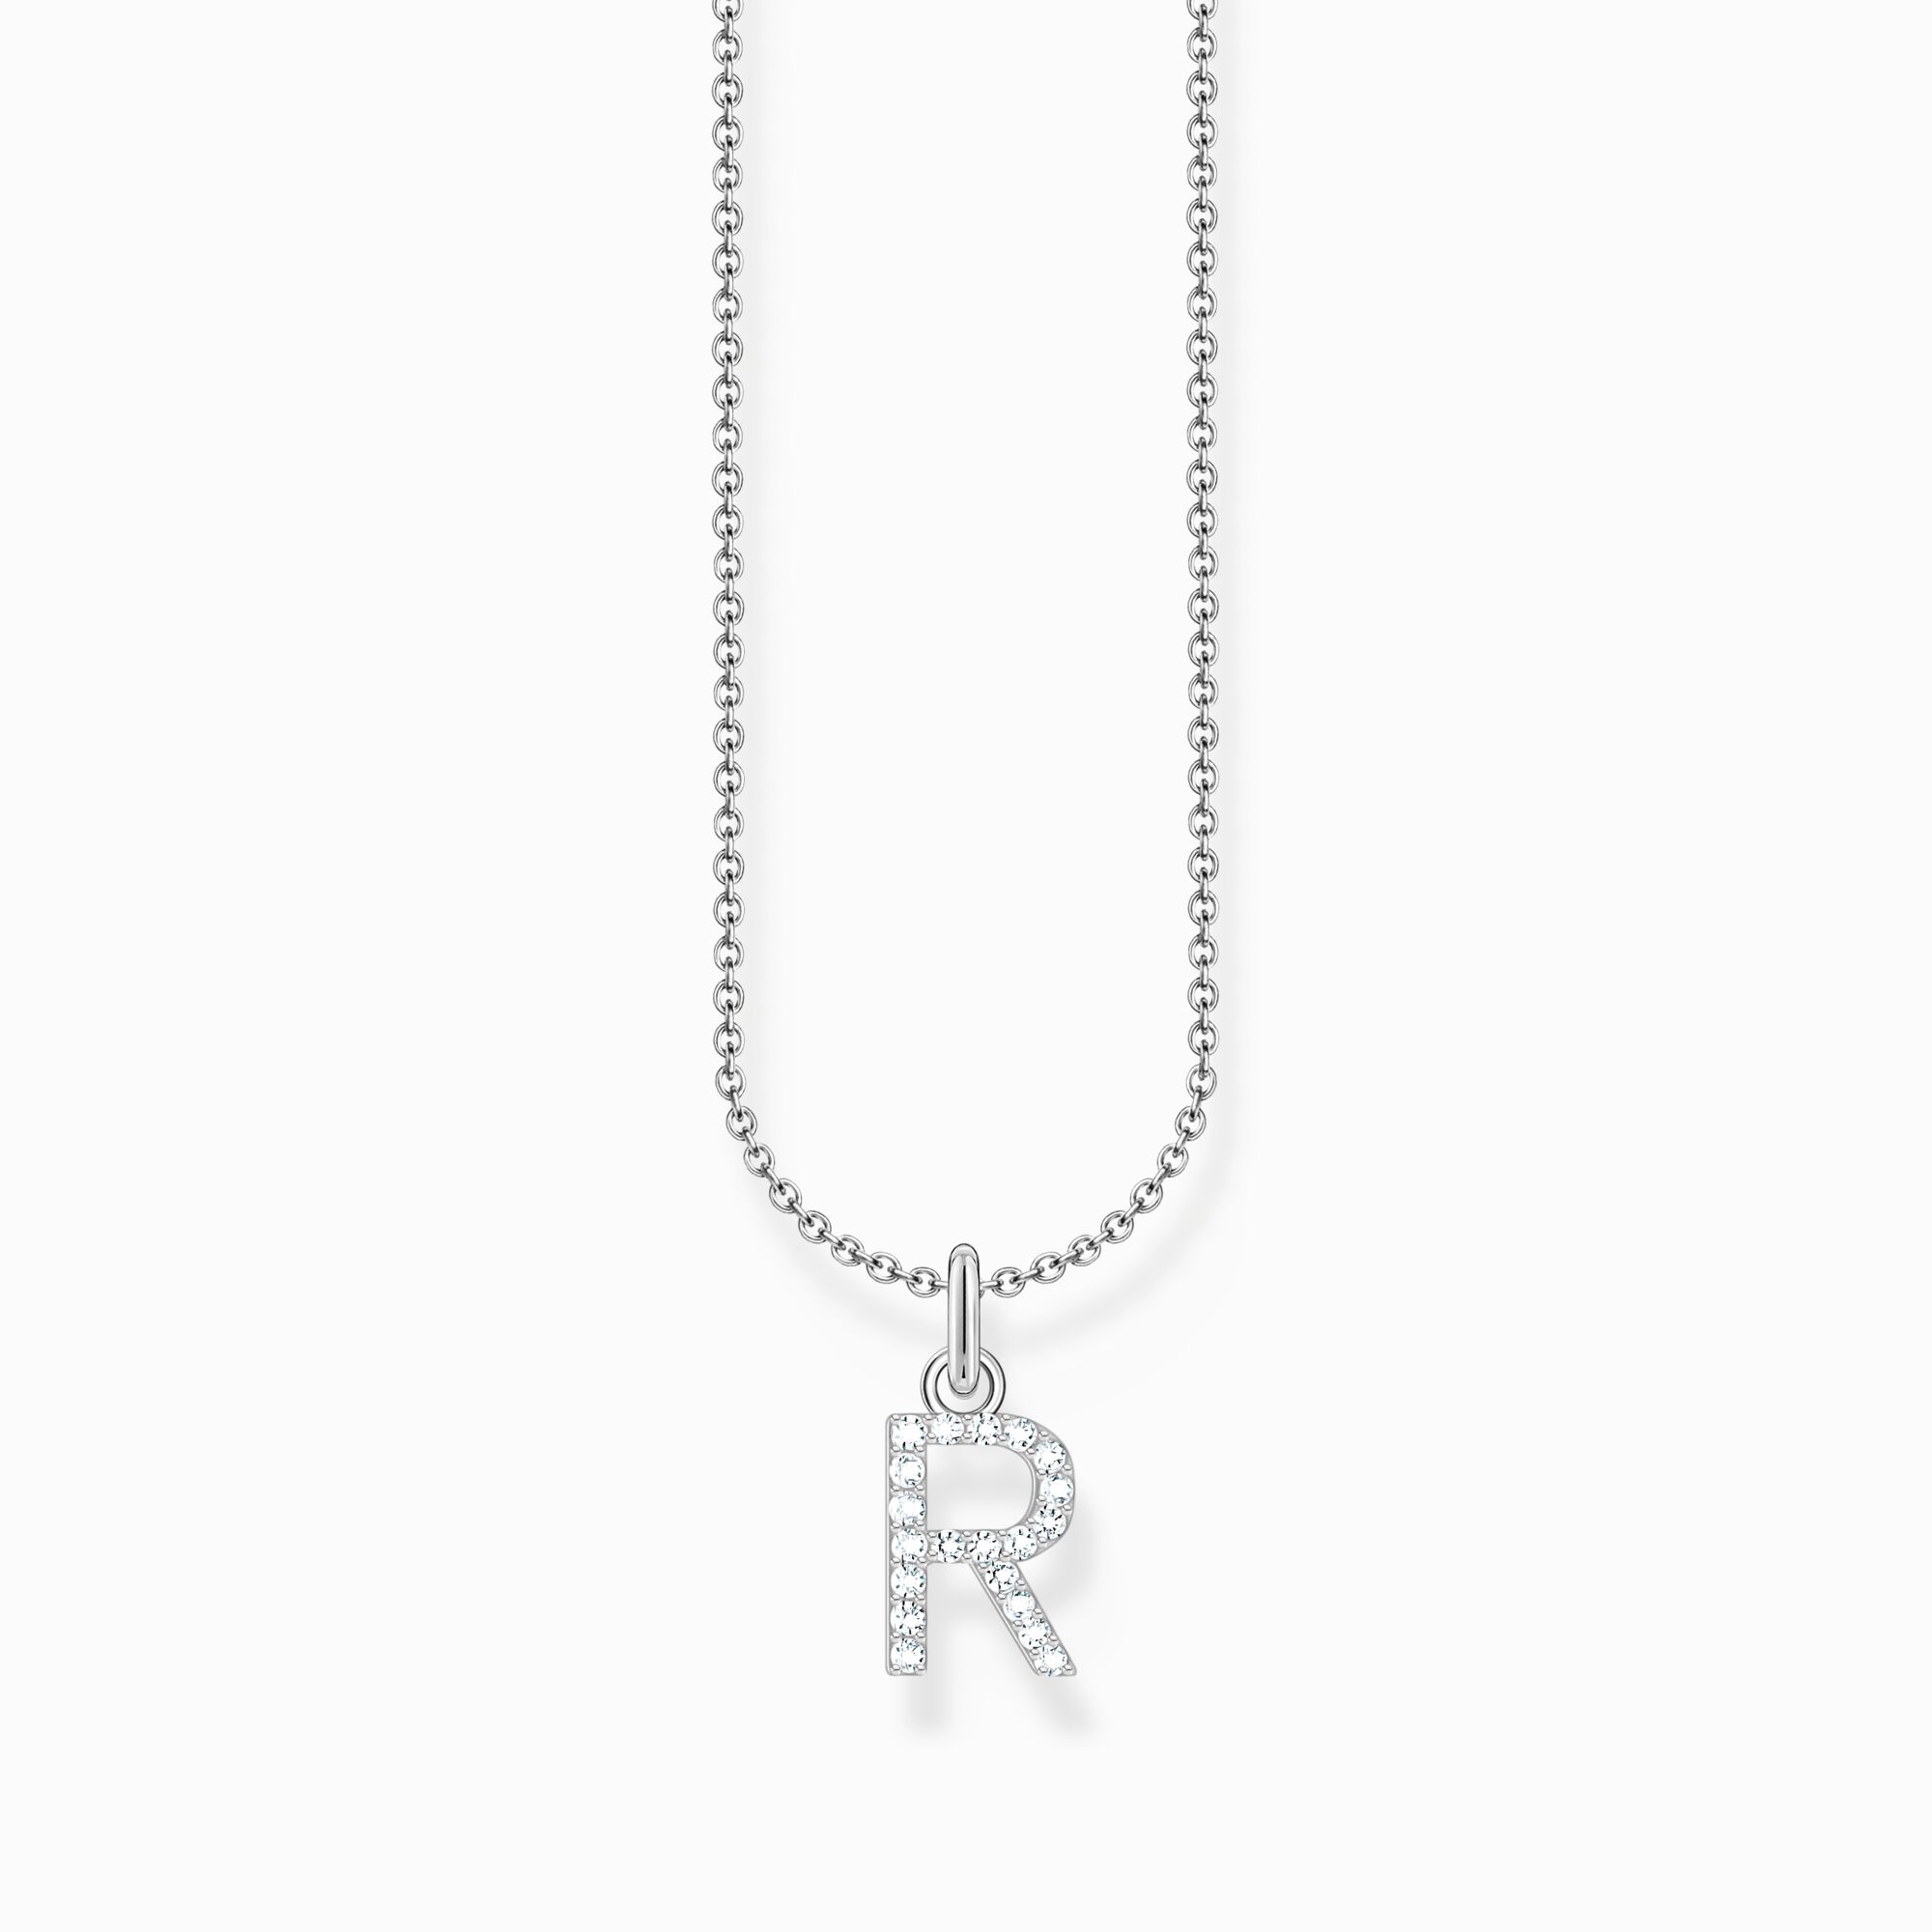 Silver necklace with letter pendant R and white zirconia from the Charming Collection collection in the THOMAS SABO online store